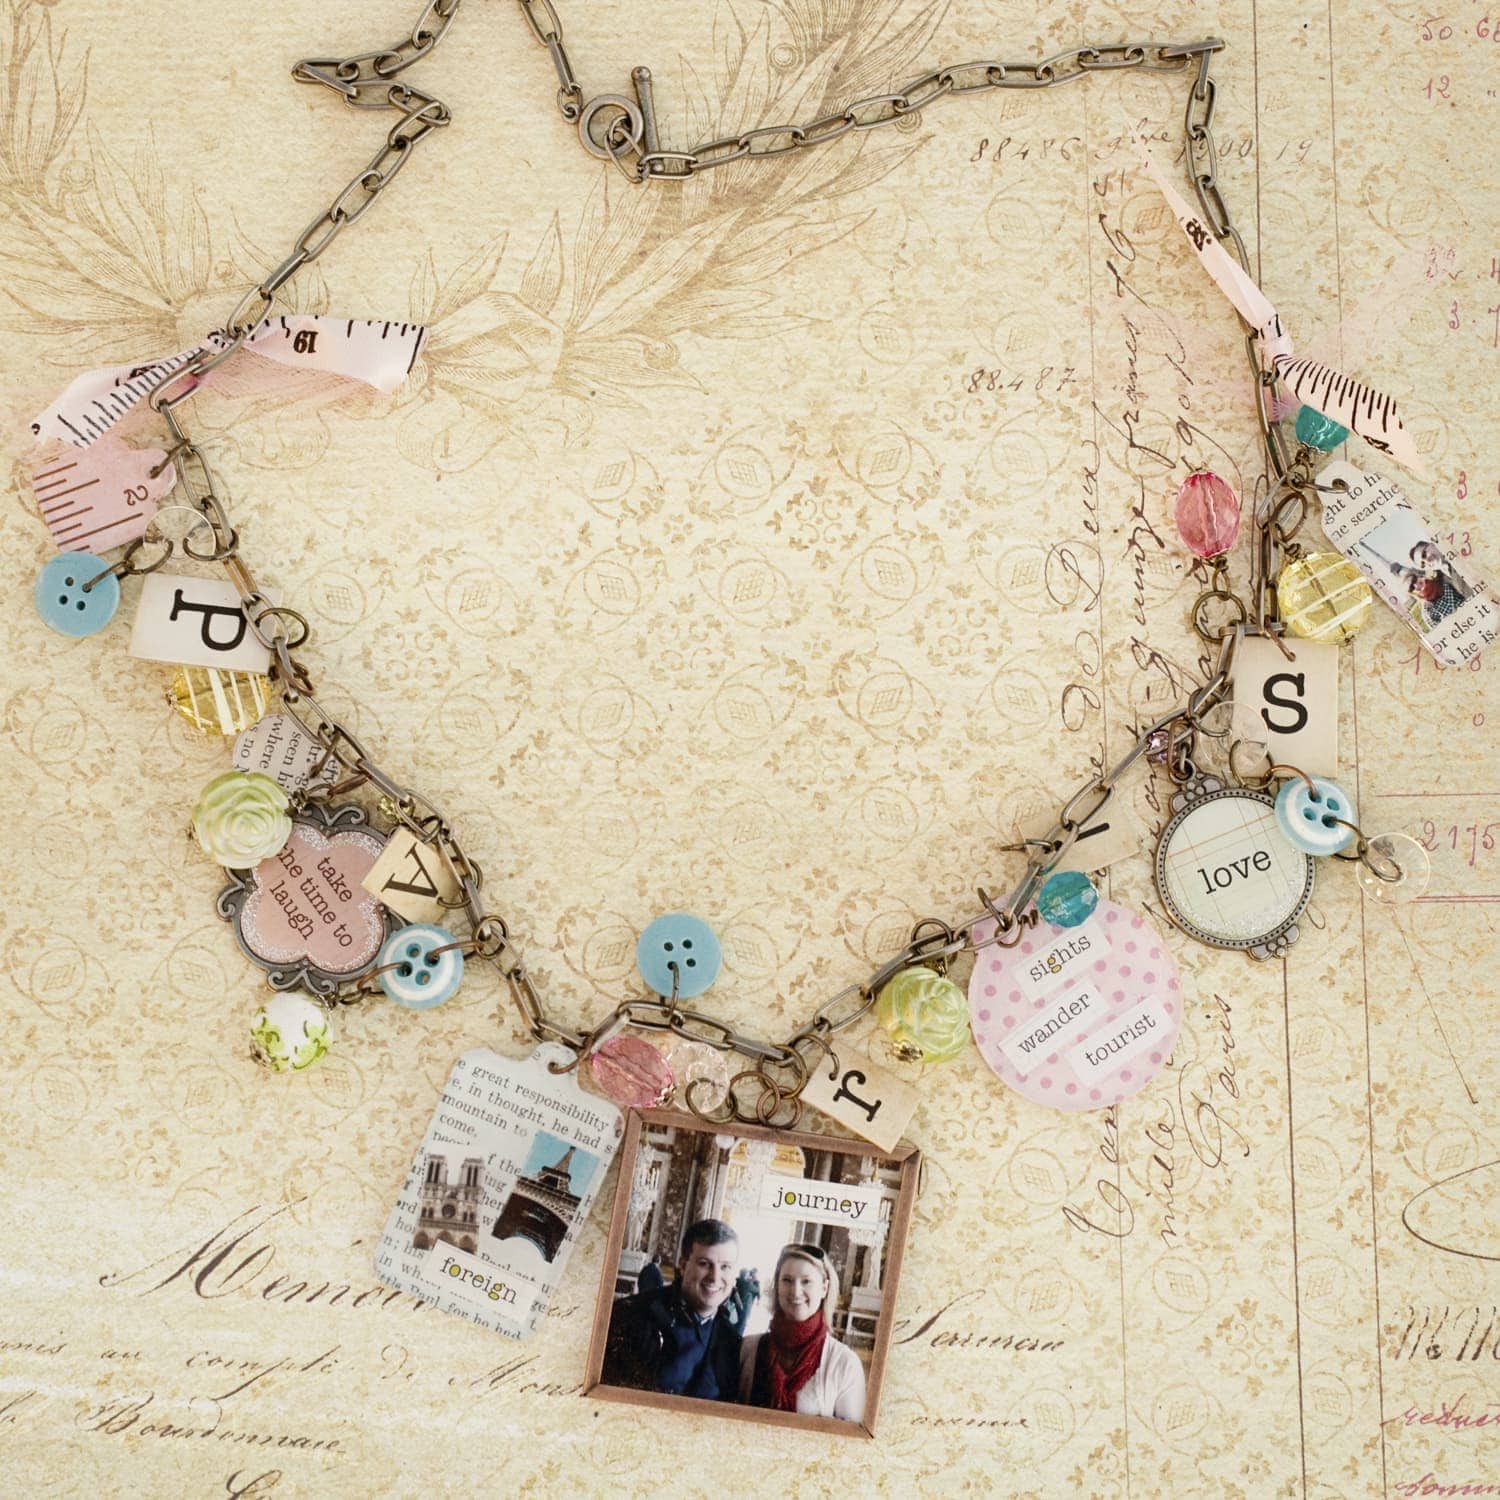 Memory Necklace Papercraft Project